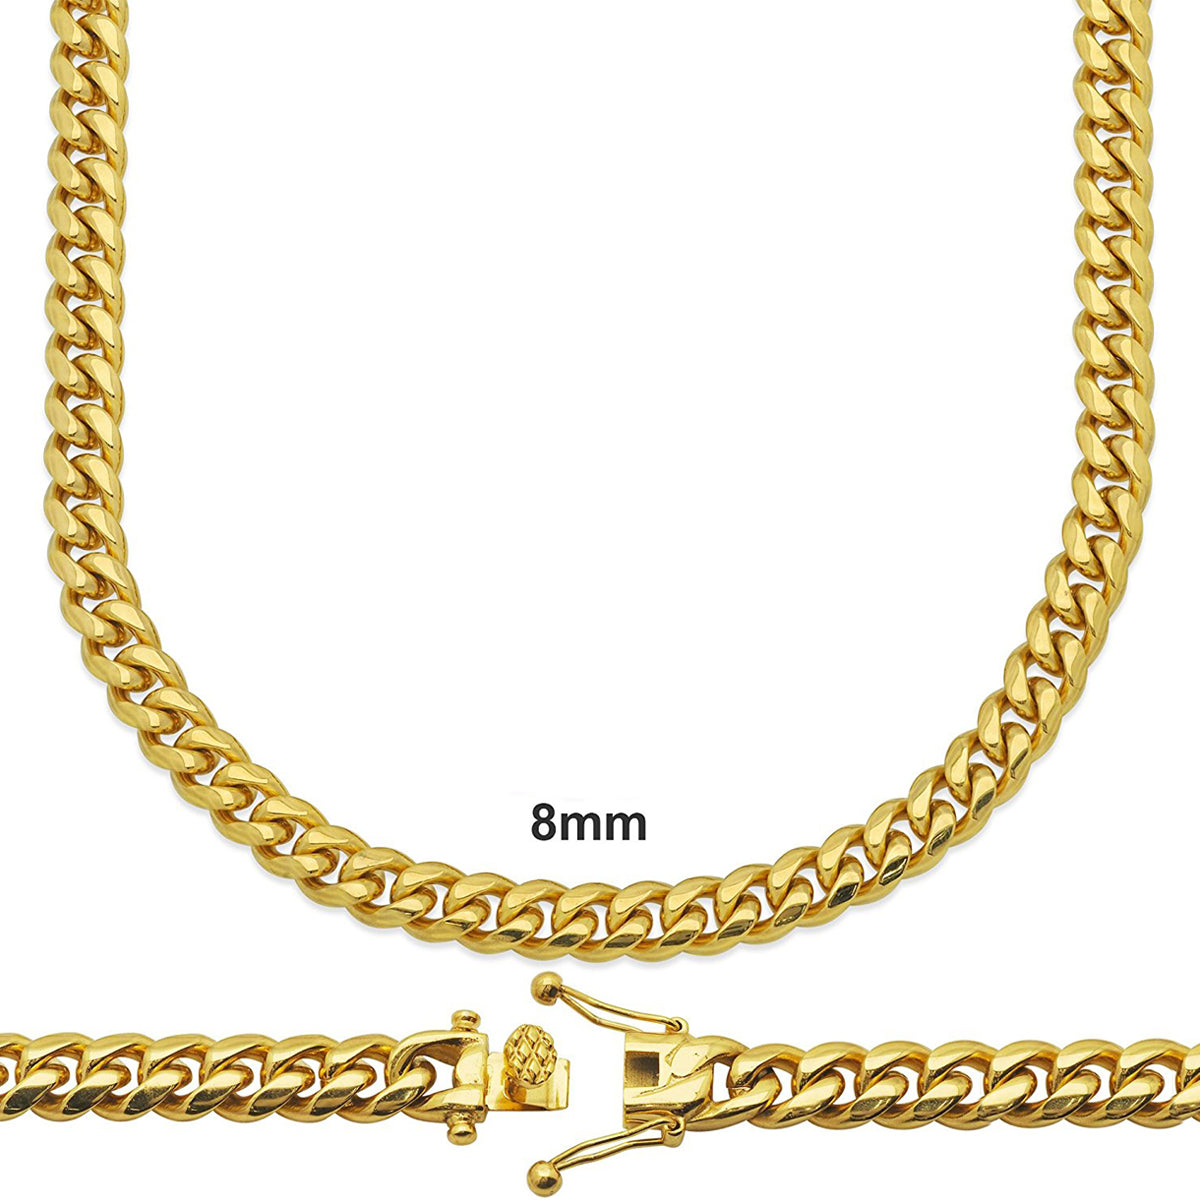 Miami Cuban 8mm thick necklace